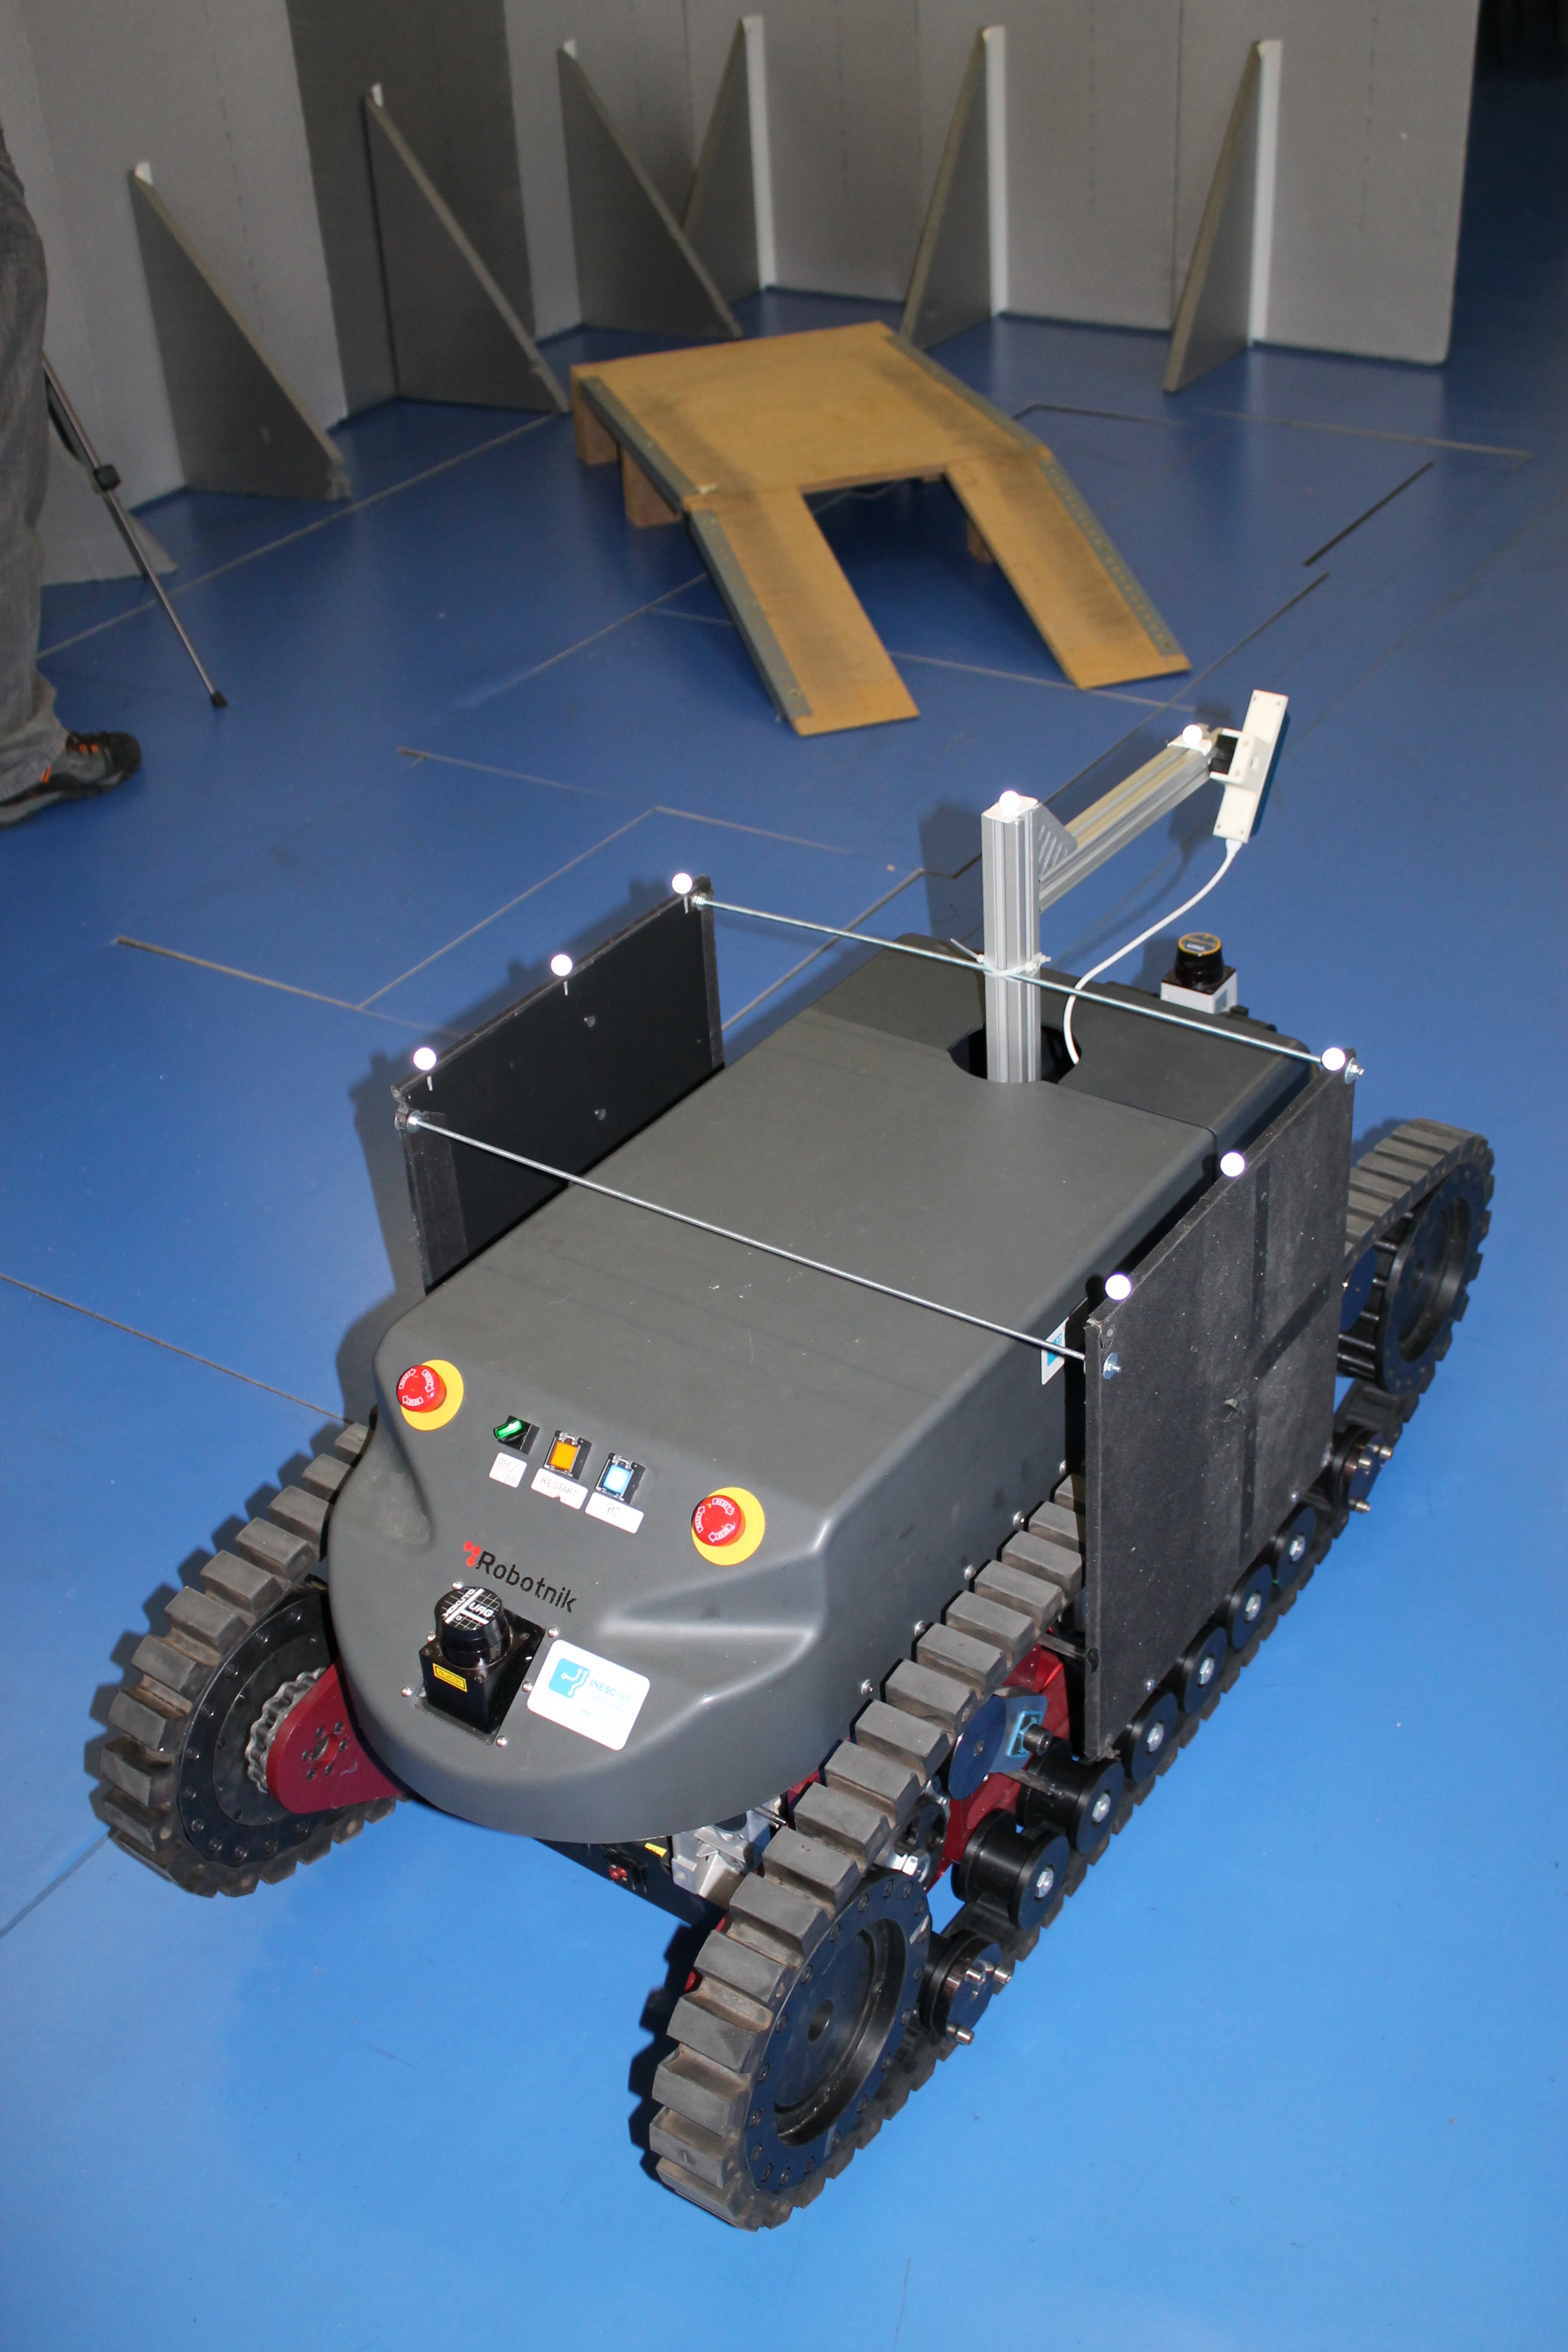 Back view of the Guardian robot